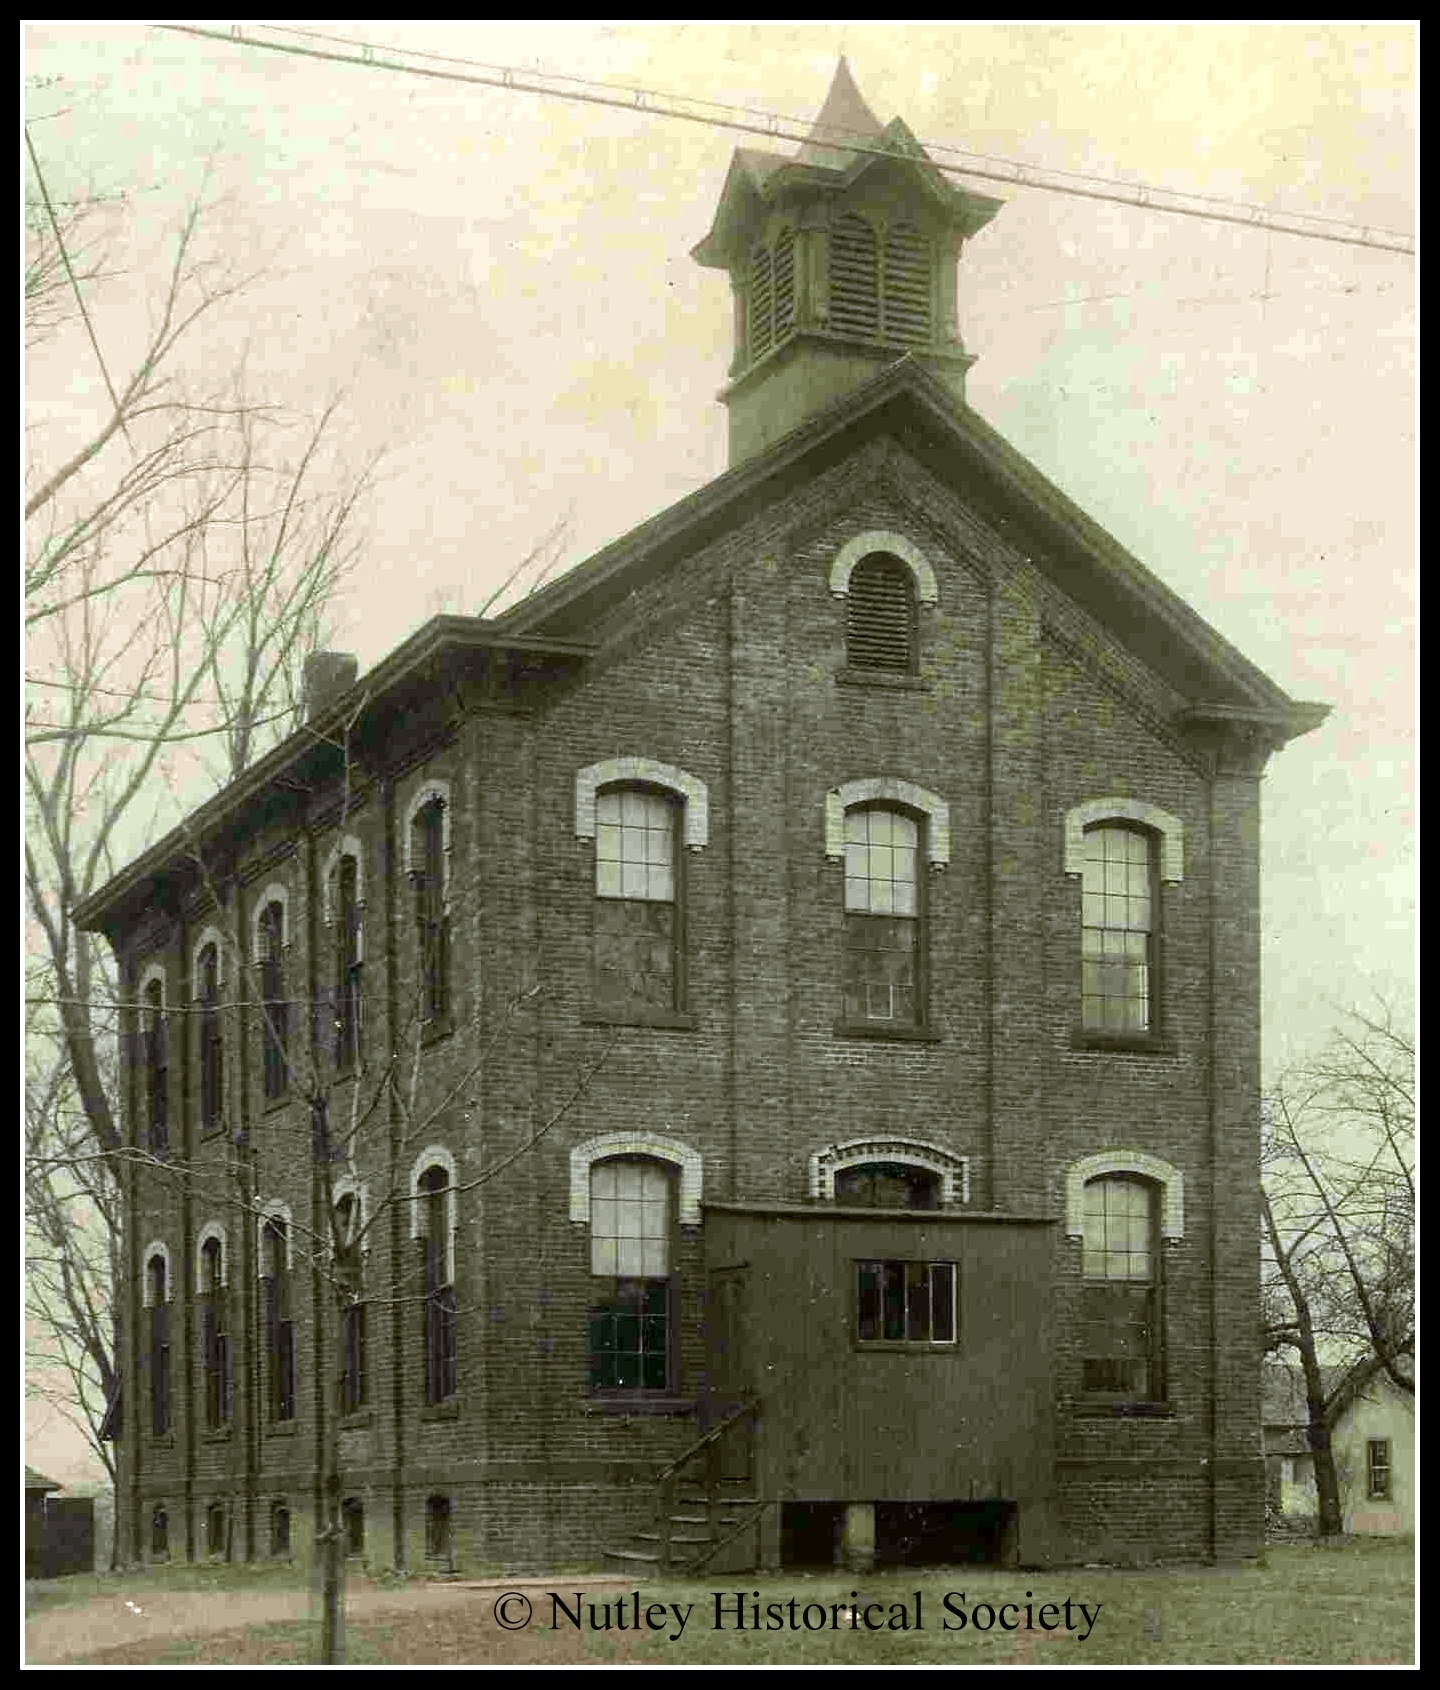 Church Street School, now the Nutley Historical Society and Nutley Museum